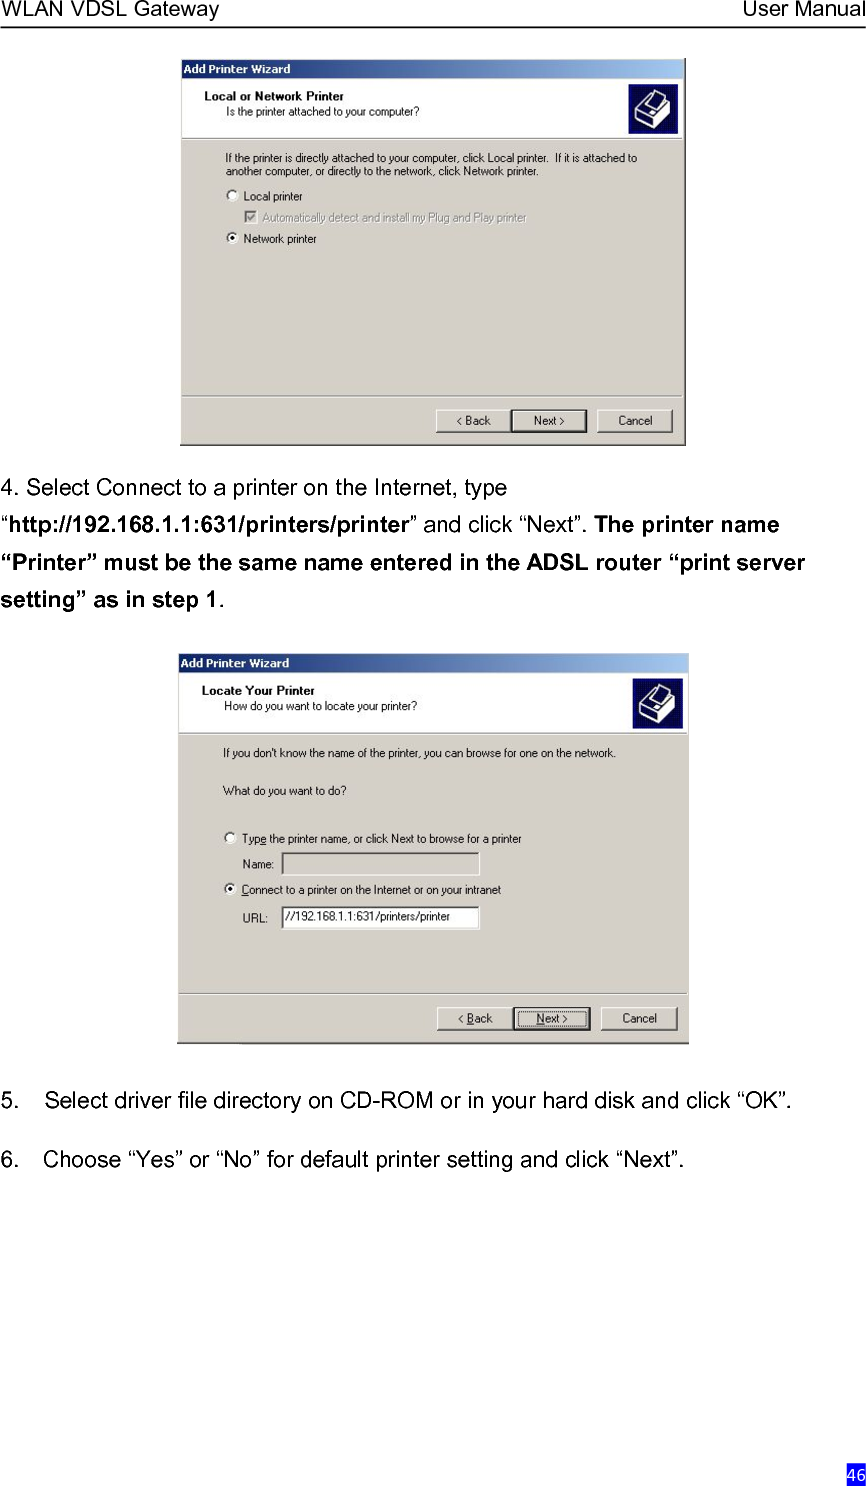 WLAN VDSL Gateway User Manual464. Select Connect to a printer on the Internet, type“http://192.168.1.1:631/printers/printer” and click “Next”. The printer name“Printer” must be the same name entered in the ADSL router “print serversetting” as in step 1.5. Select driver file directory on CD-ROM or in your hard disk and click “OK”.6. Choose “Yes” or “No” for default printer setting and click “Next”.